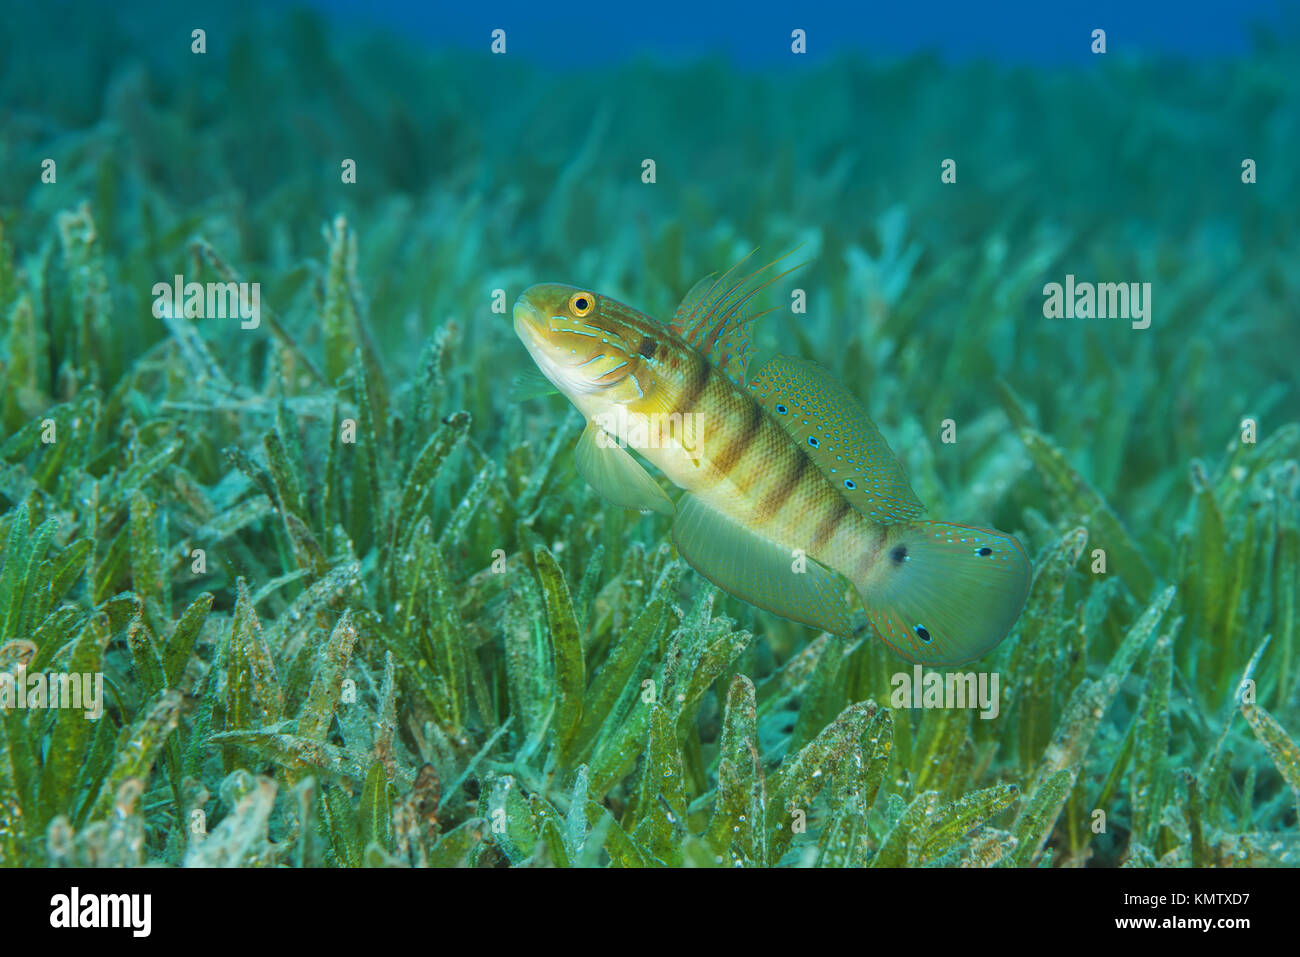 Whitelined Goby (Amblygobius albimaculatus) protects nest built in the seagrass, Red sea, Dahab, Egypt Stock Photo